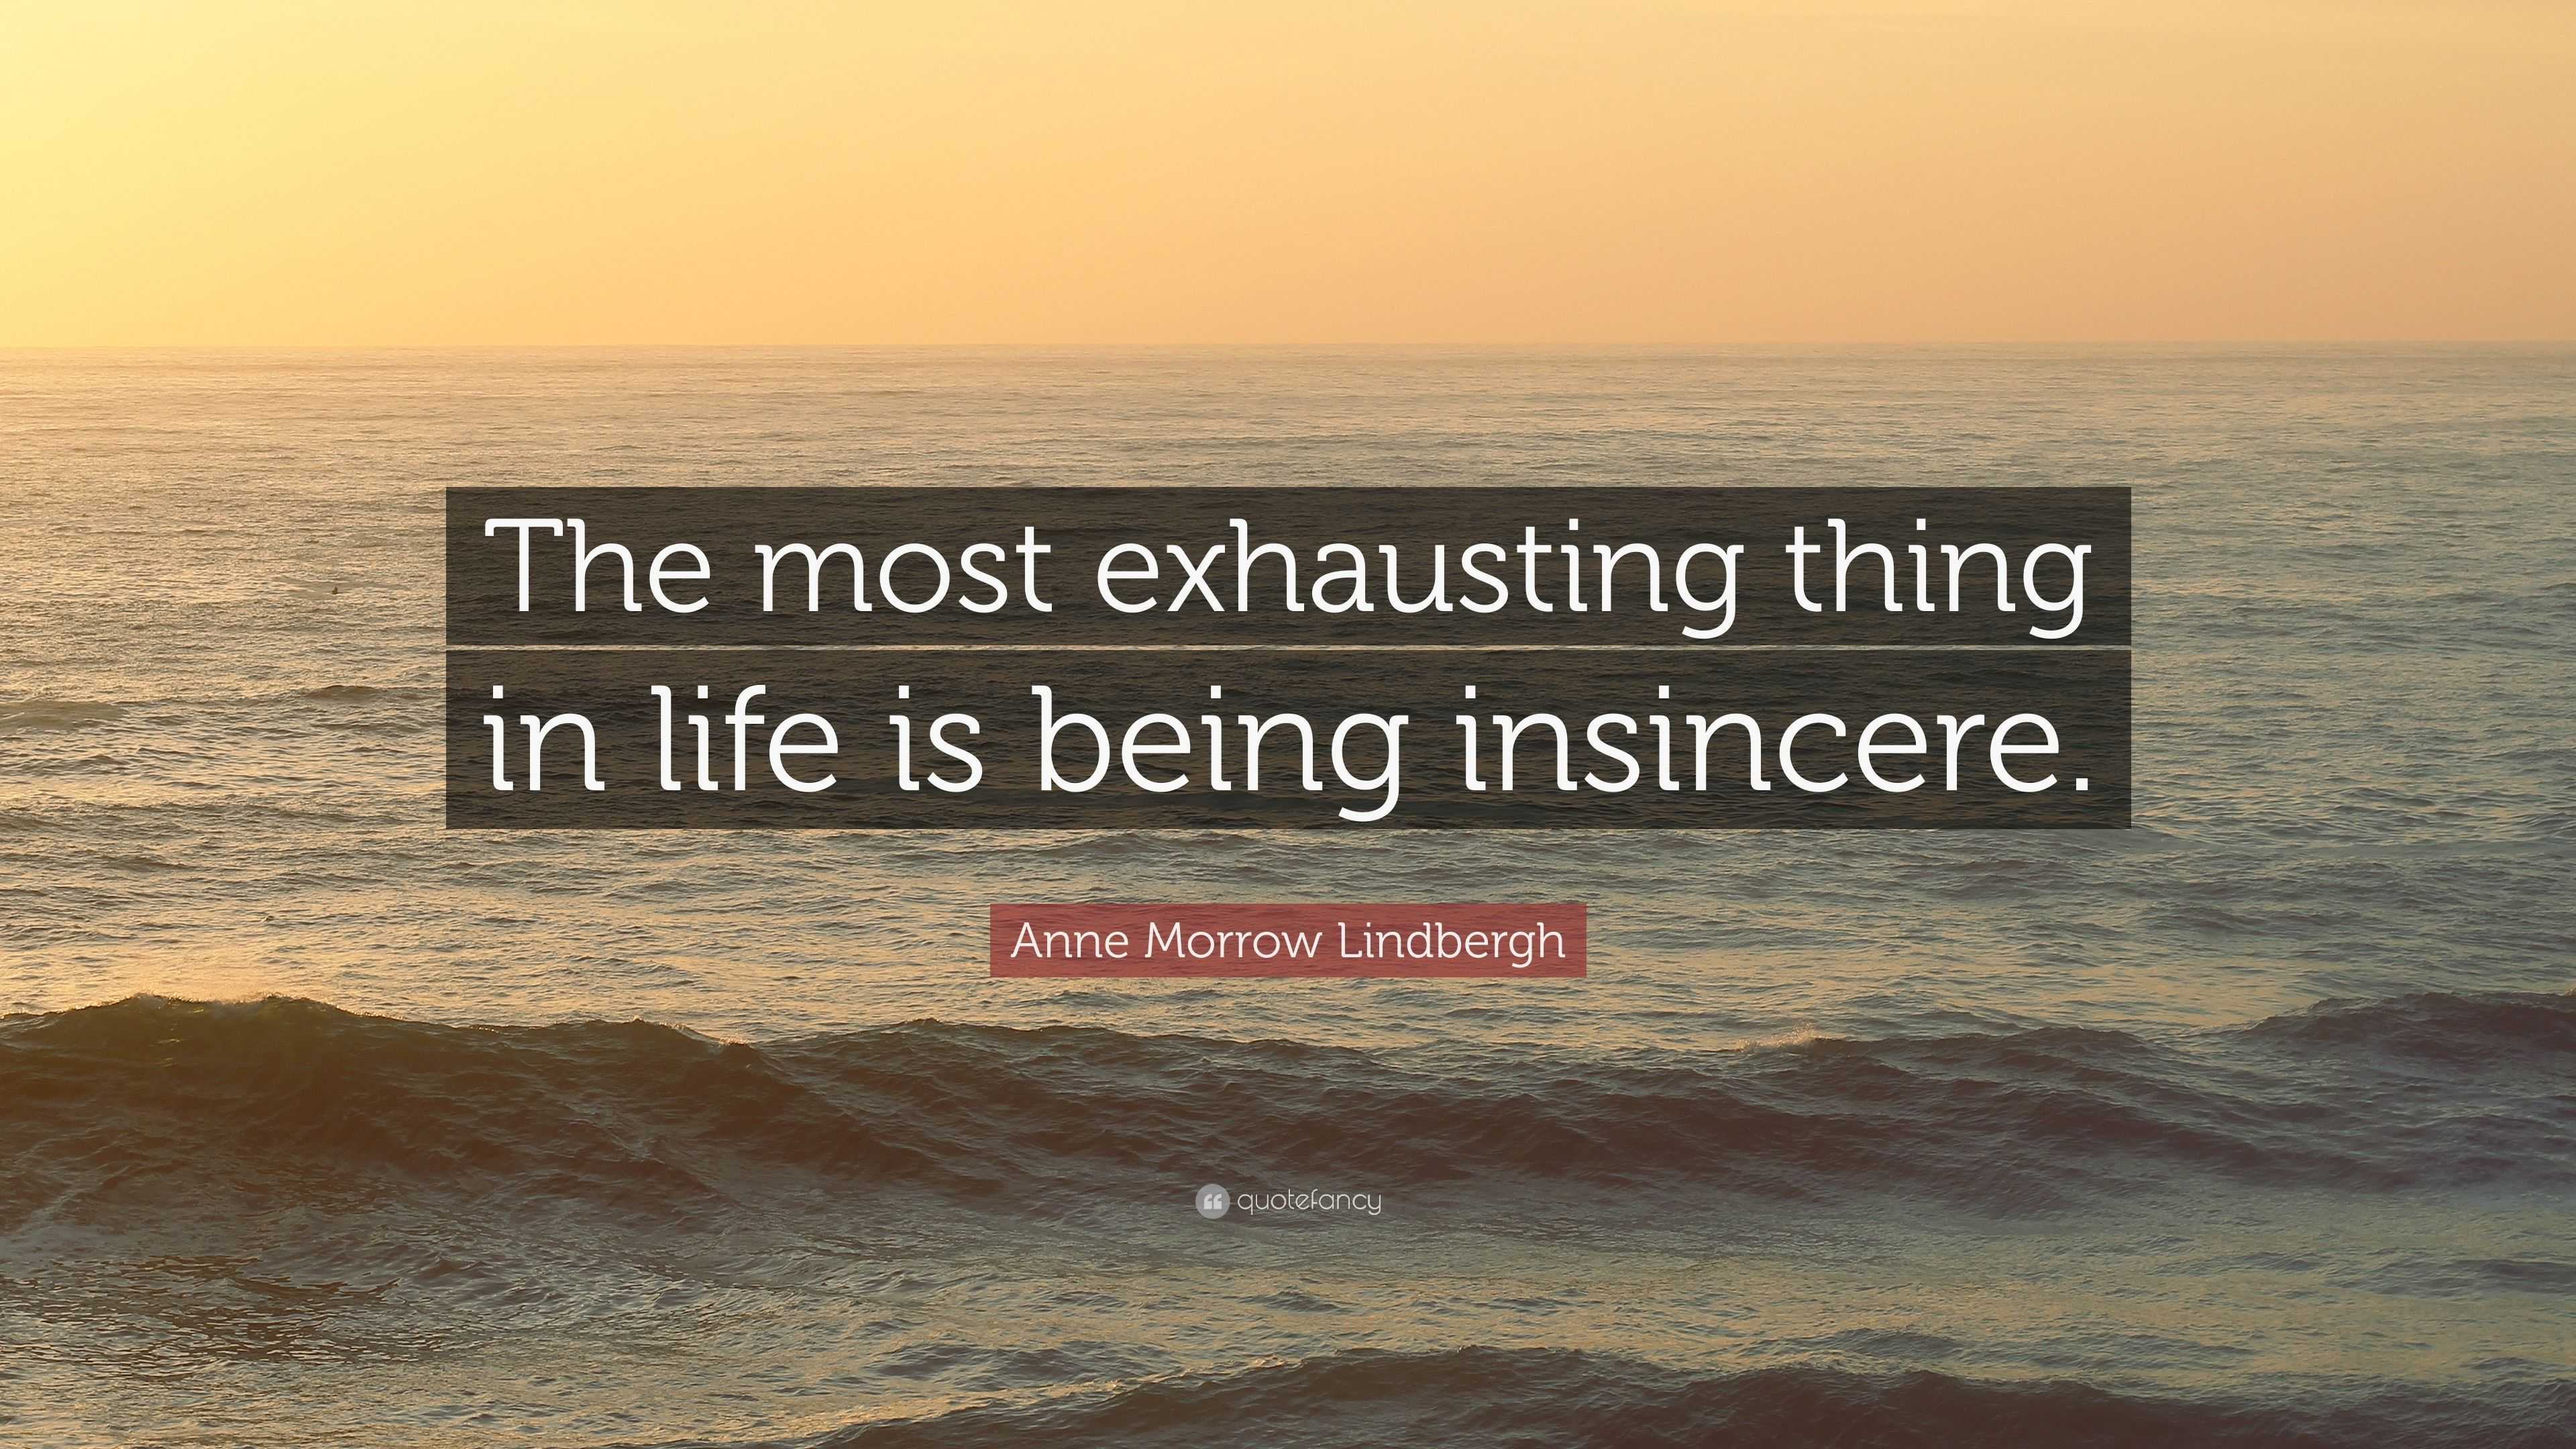 Anne Morrow Lindbergh Quote: “The most exhausting thing in life is ...